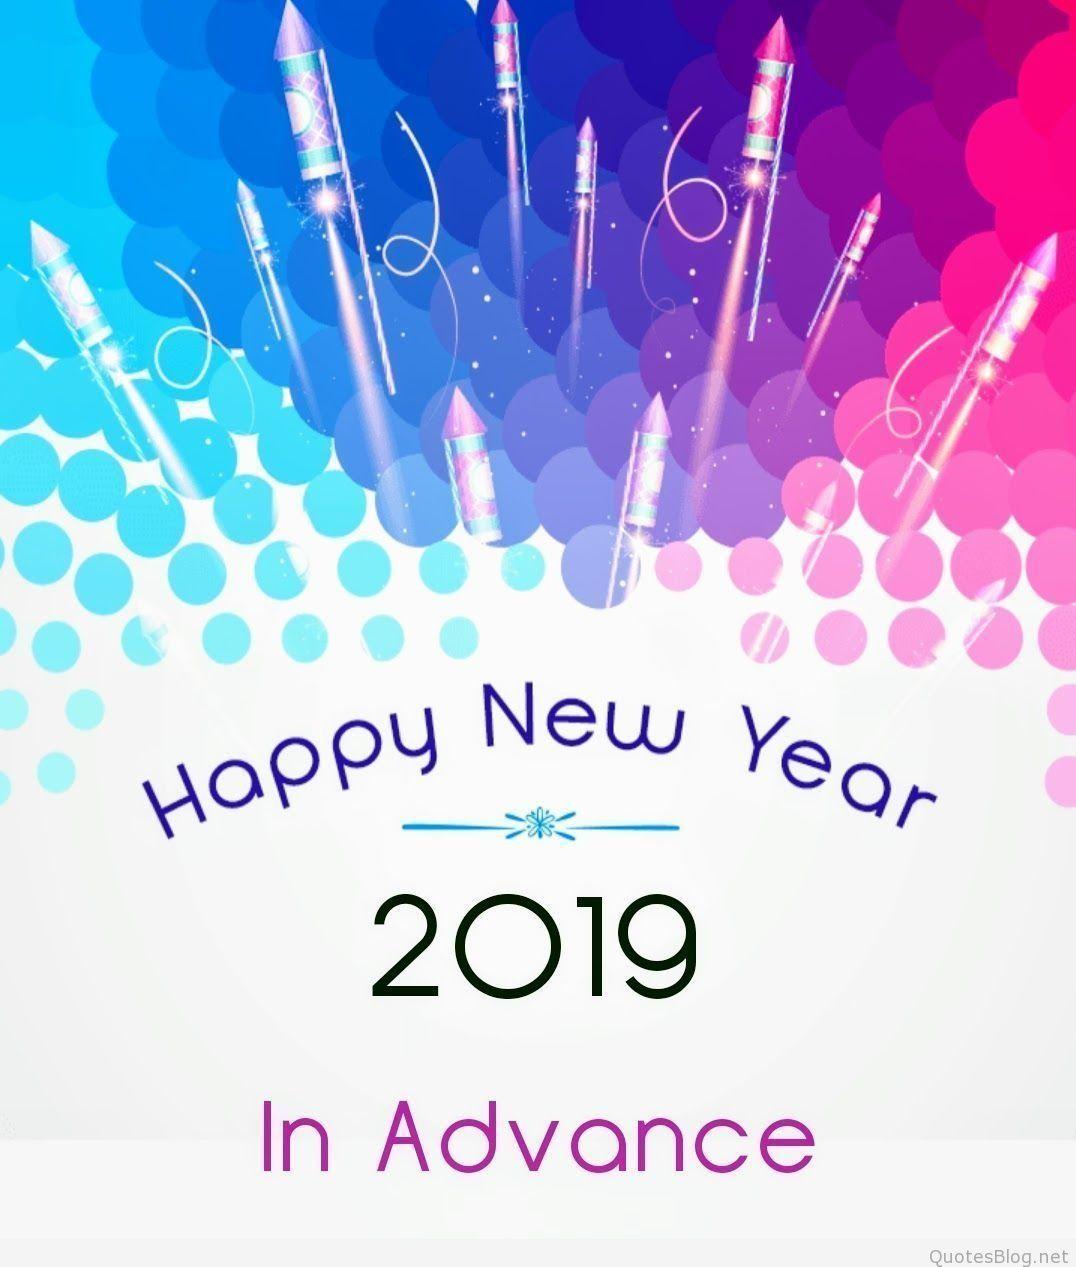 Advance Happy New Year 2019 Image, Wallpaper, Wishes